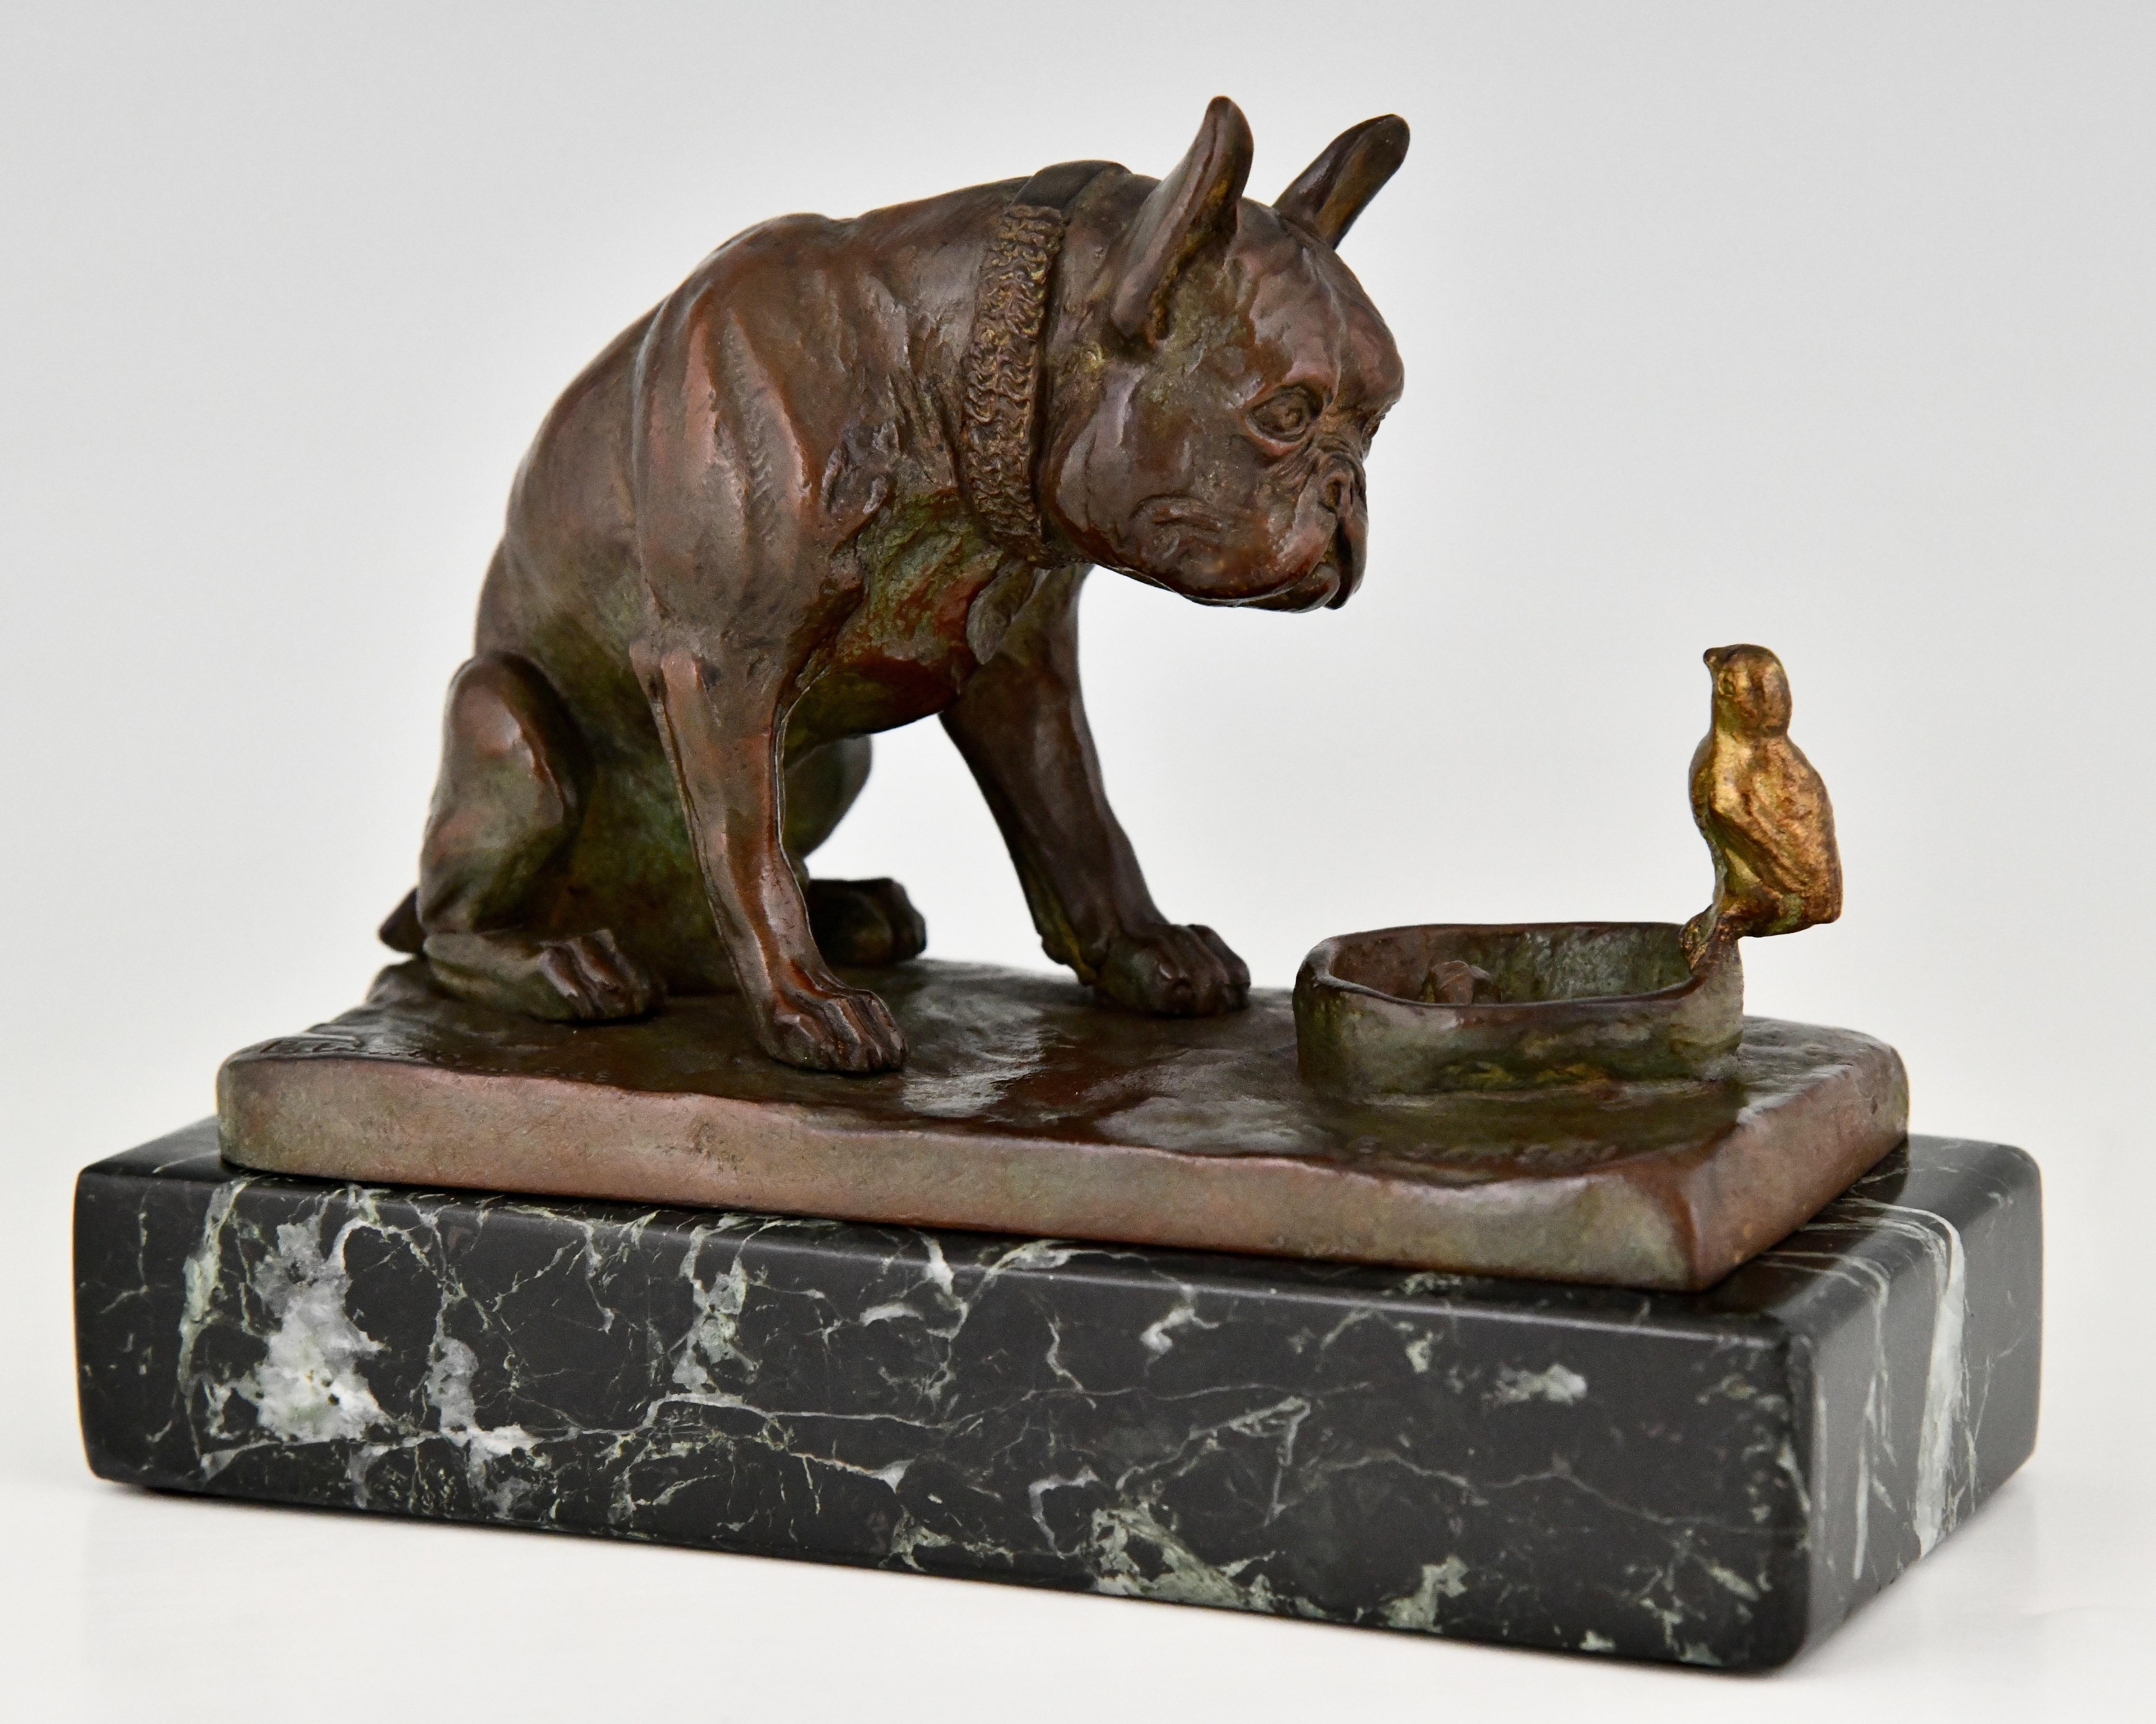 Lovely bronze sculpture of a sitting French Bulldog staring at a chick standing on his bowl by the French sculptor E.M. Samson (XIX-XX)
With Patrouilleau founders' signature. 
Brown patinated bronze on marble base. 

 Literature:
“Mascottes